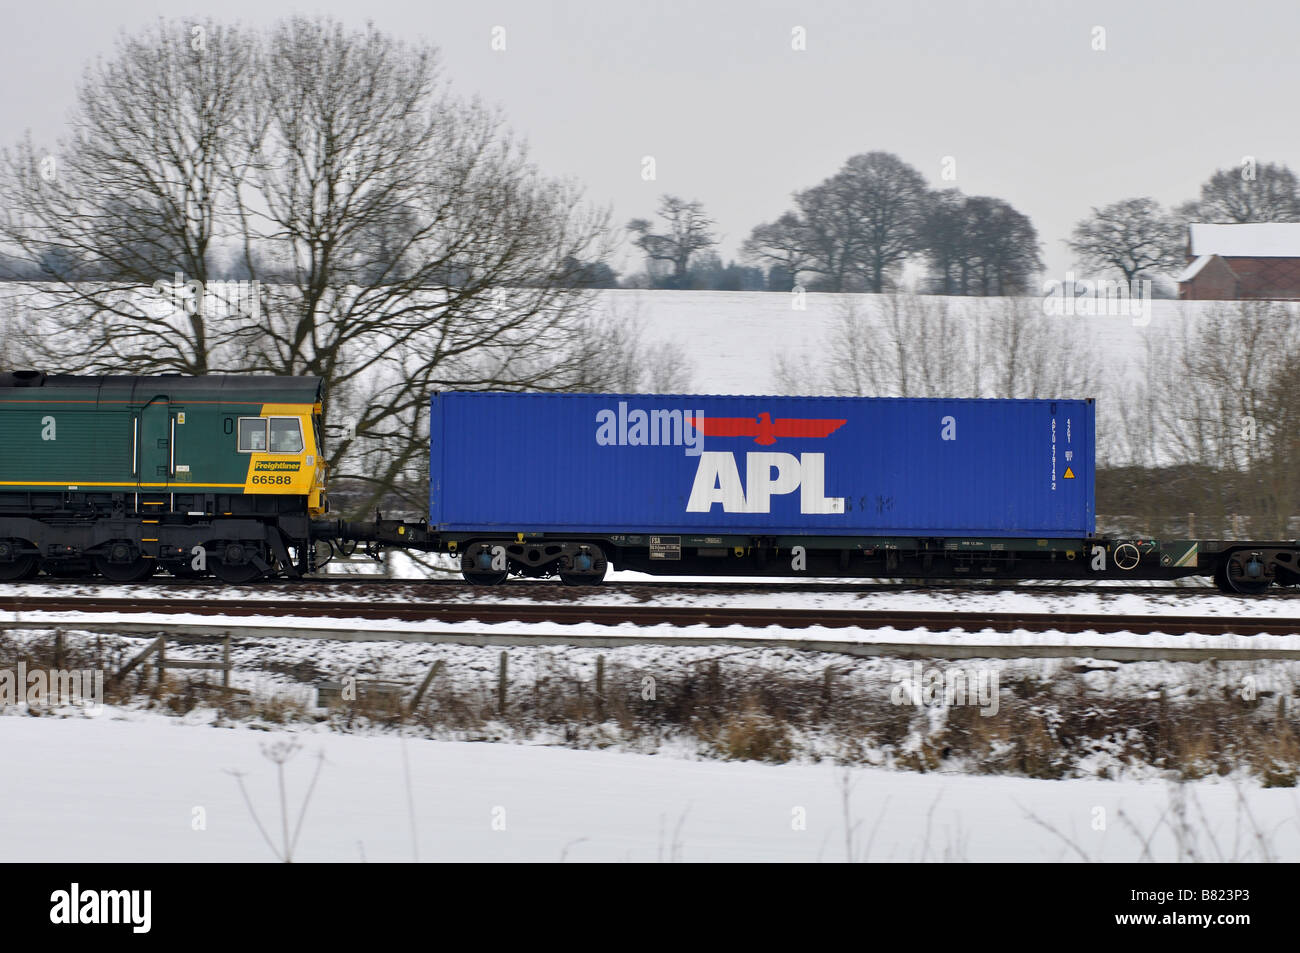 APL shipping container on freightliner train in snow, UK Stock Photo